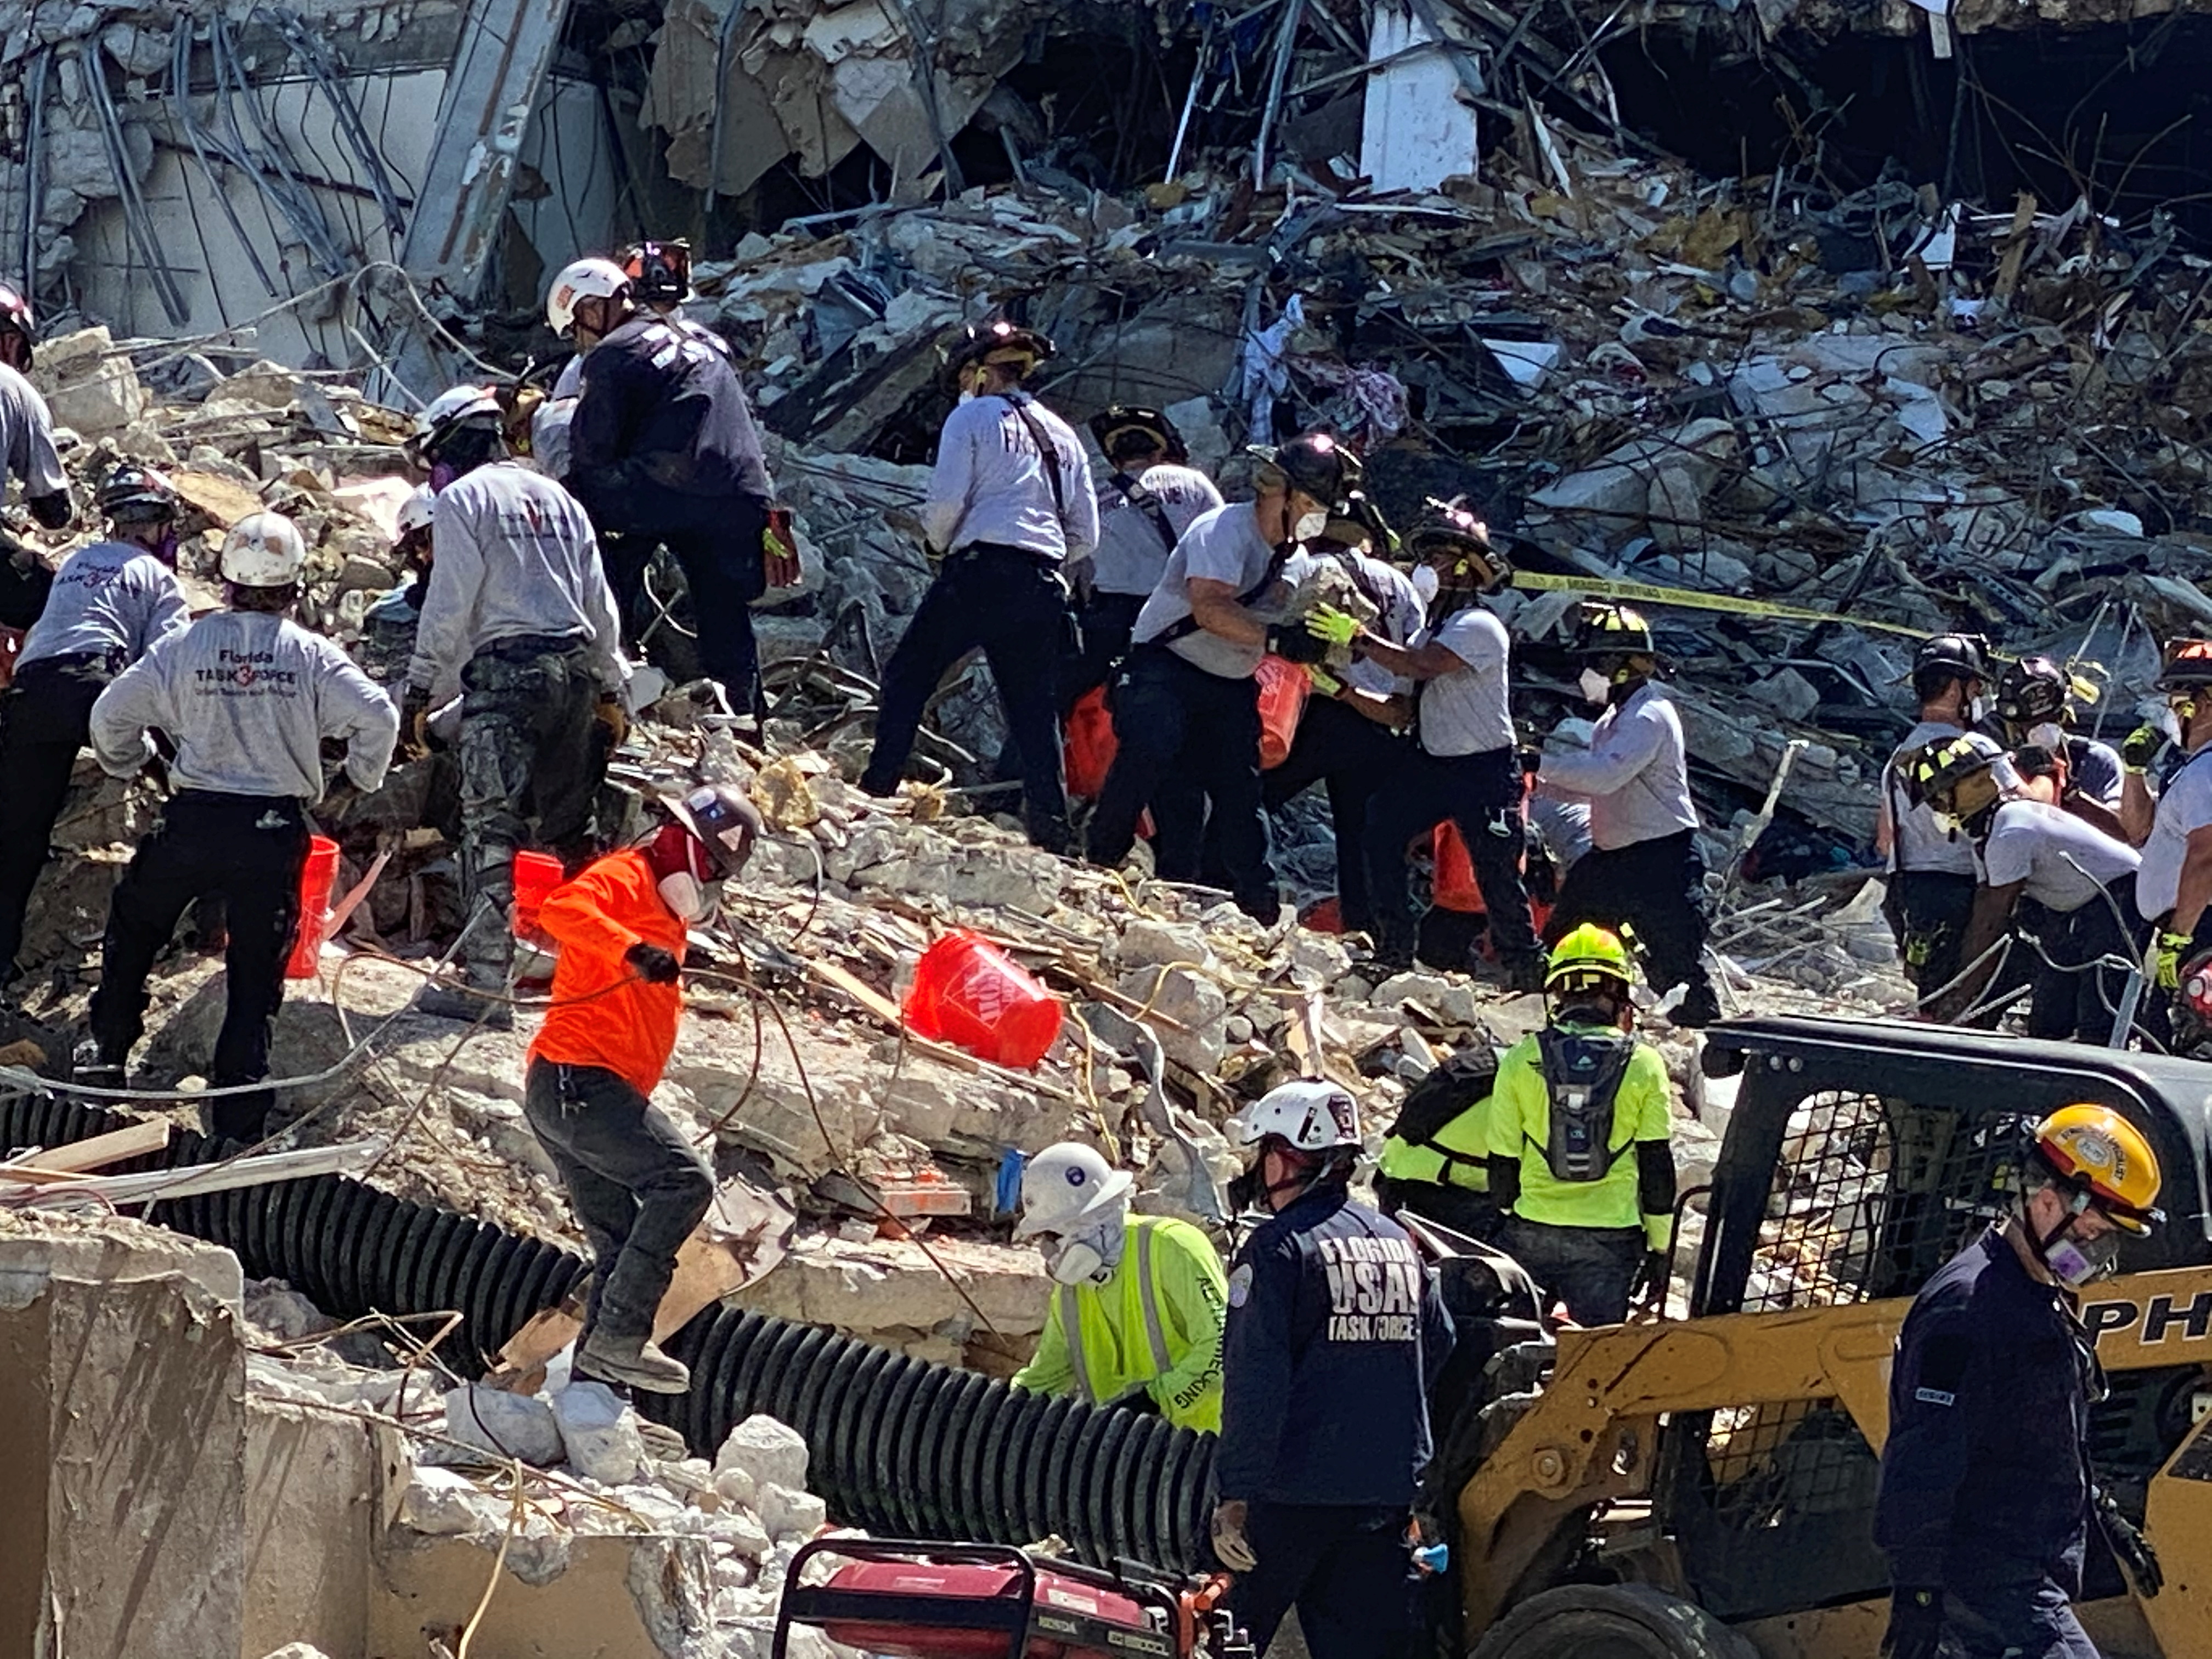 Rescue personnel work at the scene of the partially collapsed Champlain South Towers condominium in Surfside, near Miami Beach, Florida, in this undated recent photograph. Courtesy of Florida Task Force 3 / via REUTERS   